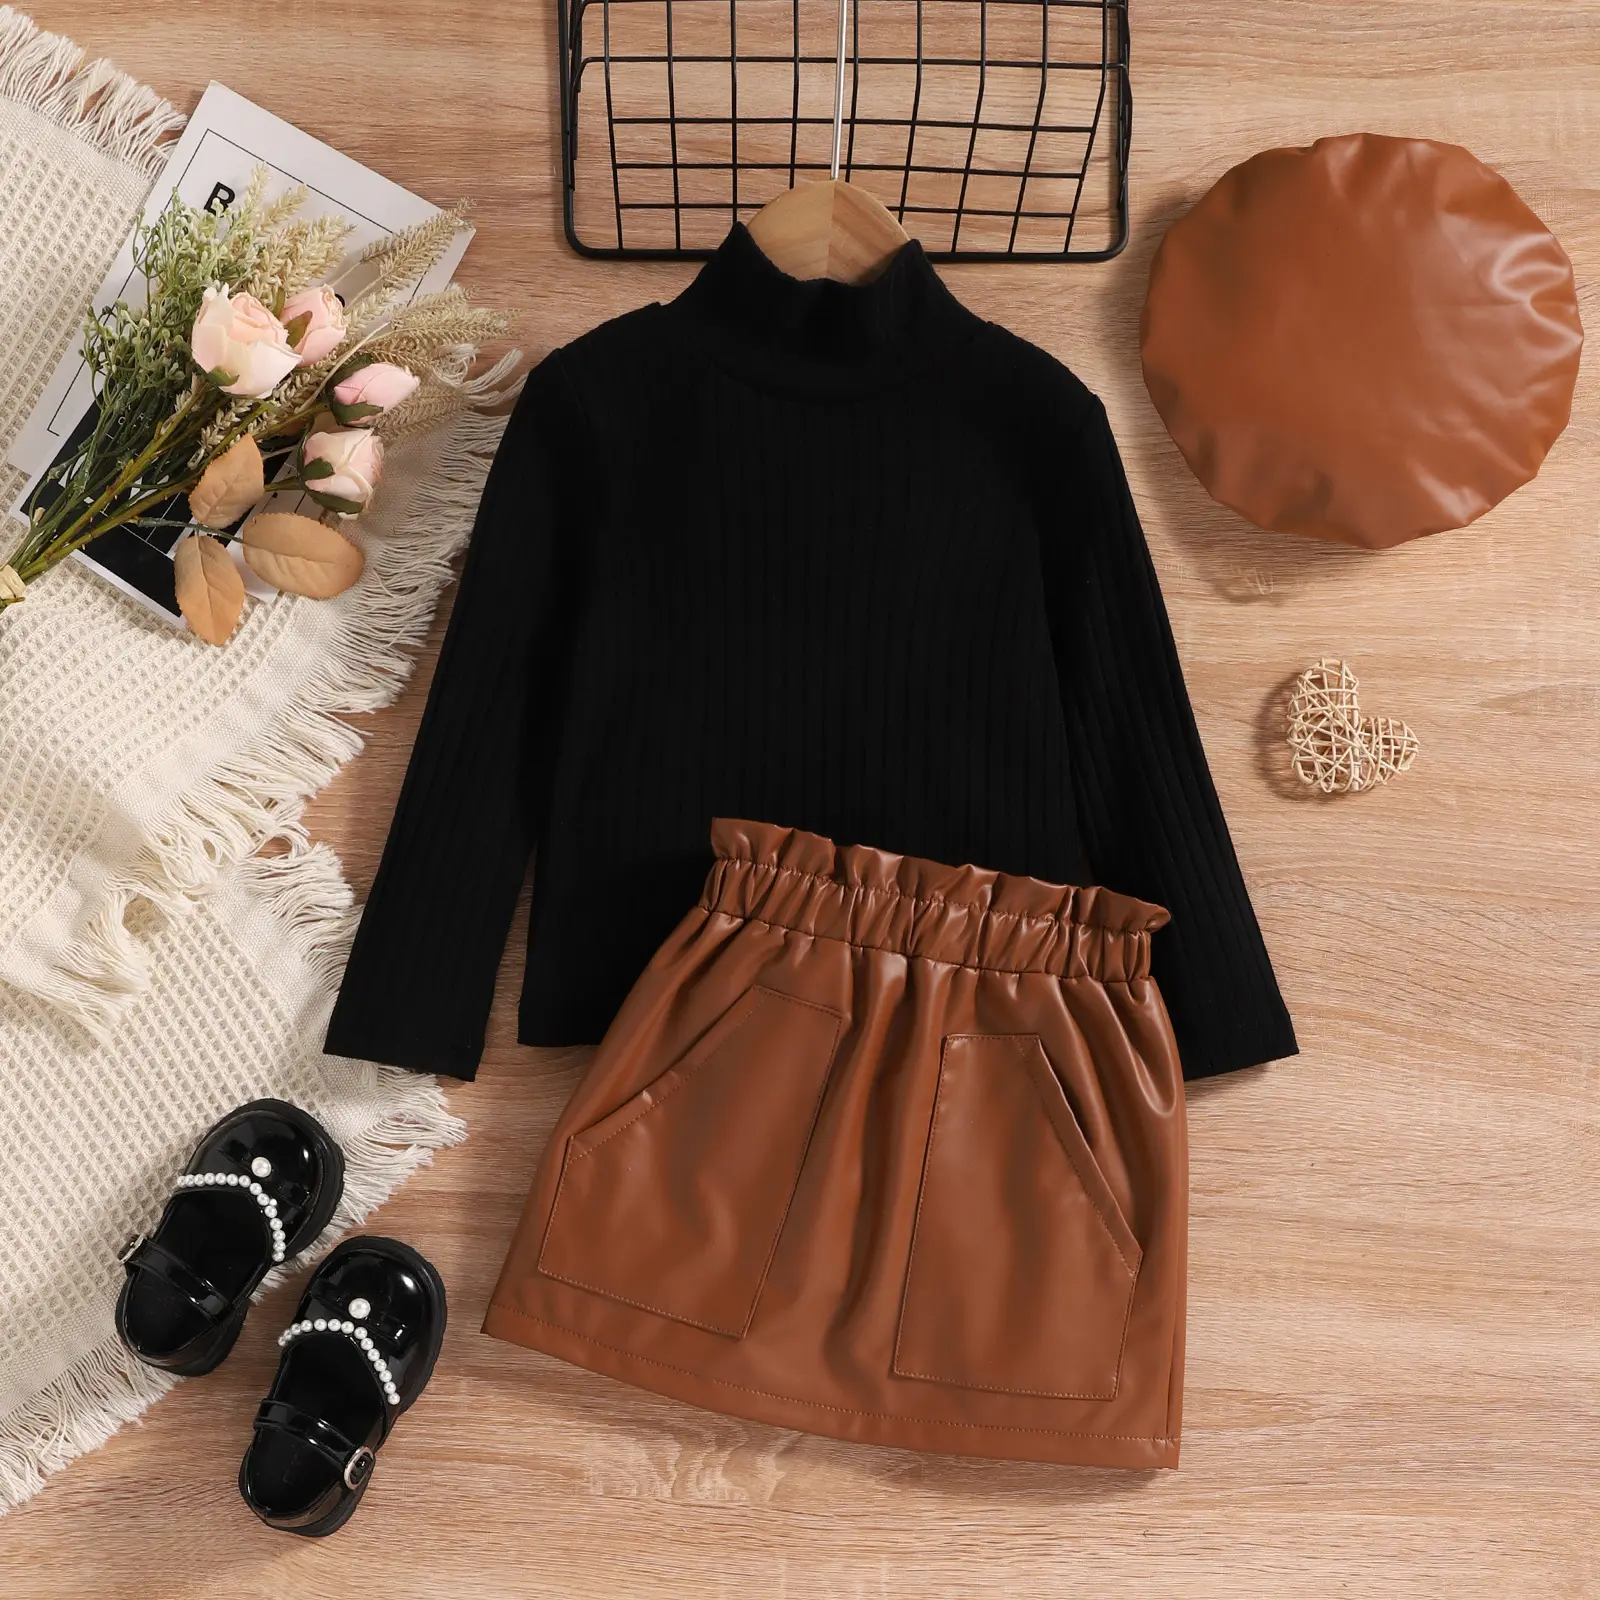 2022 Autumn Winter Girls Children Dress Clothes Sets Small High Neck Long Sleeve Base Leather Skirt with Hat Kids Outfits